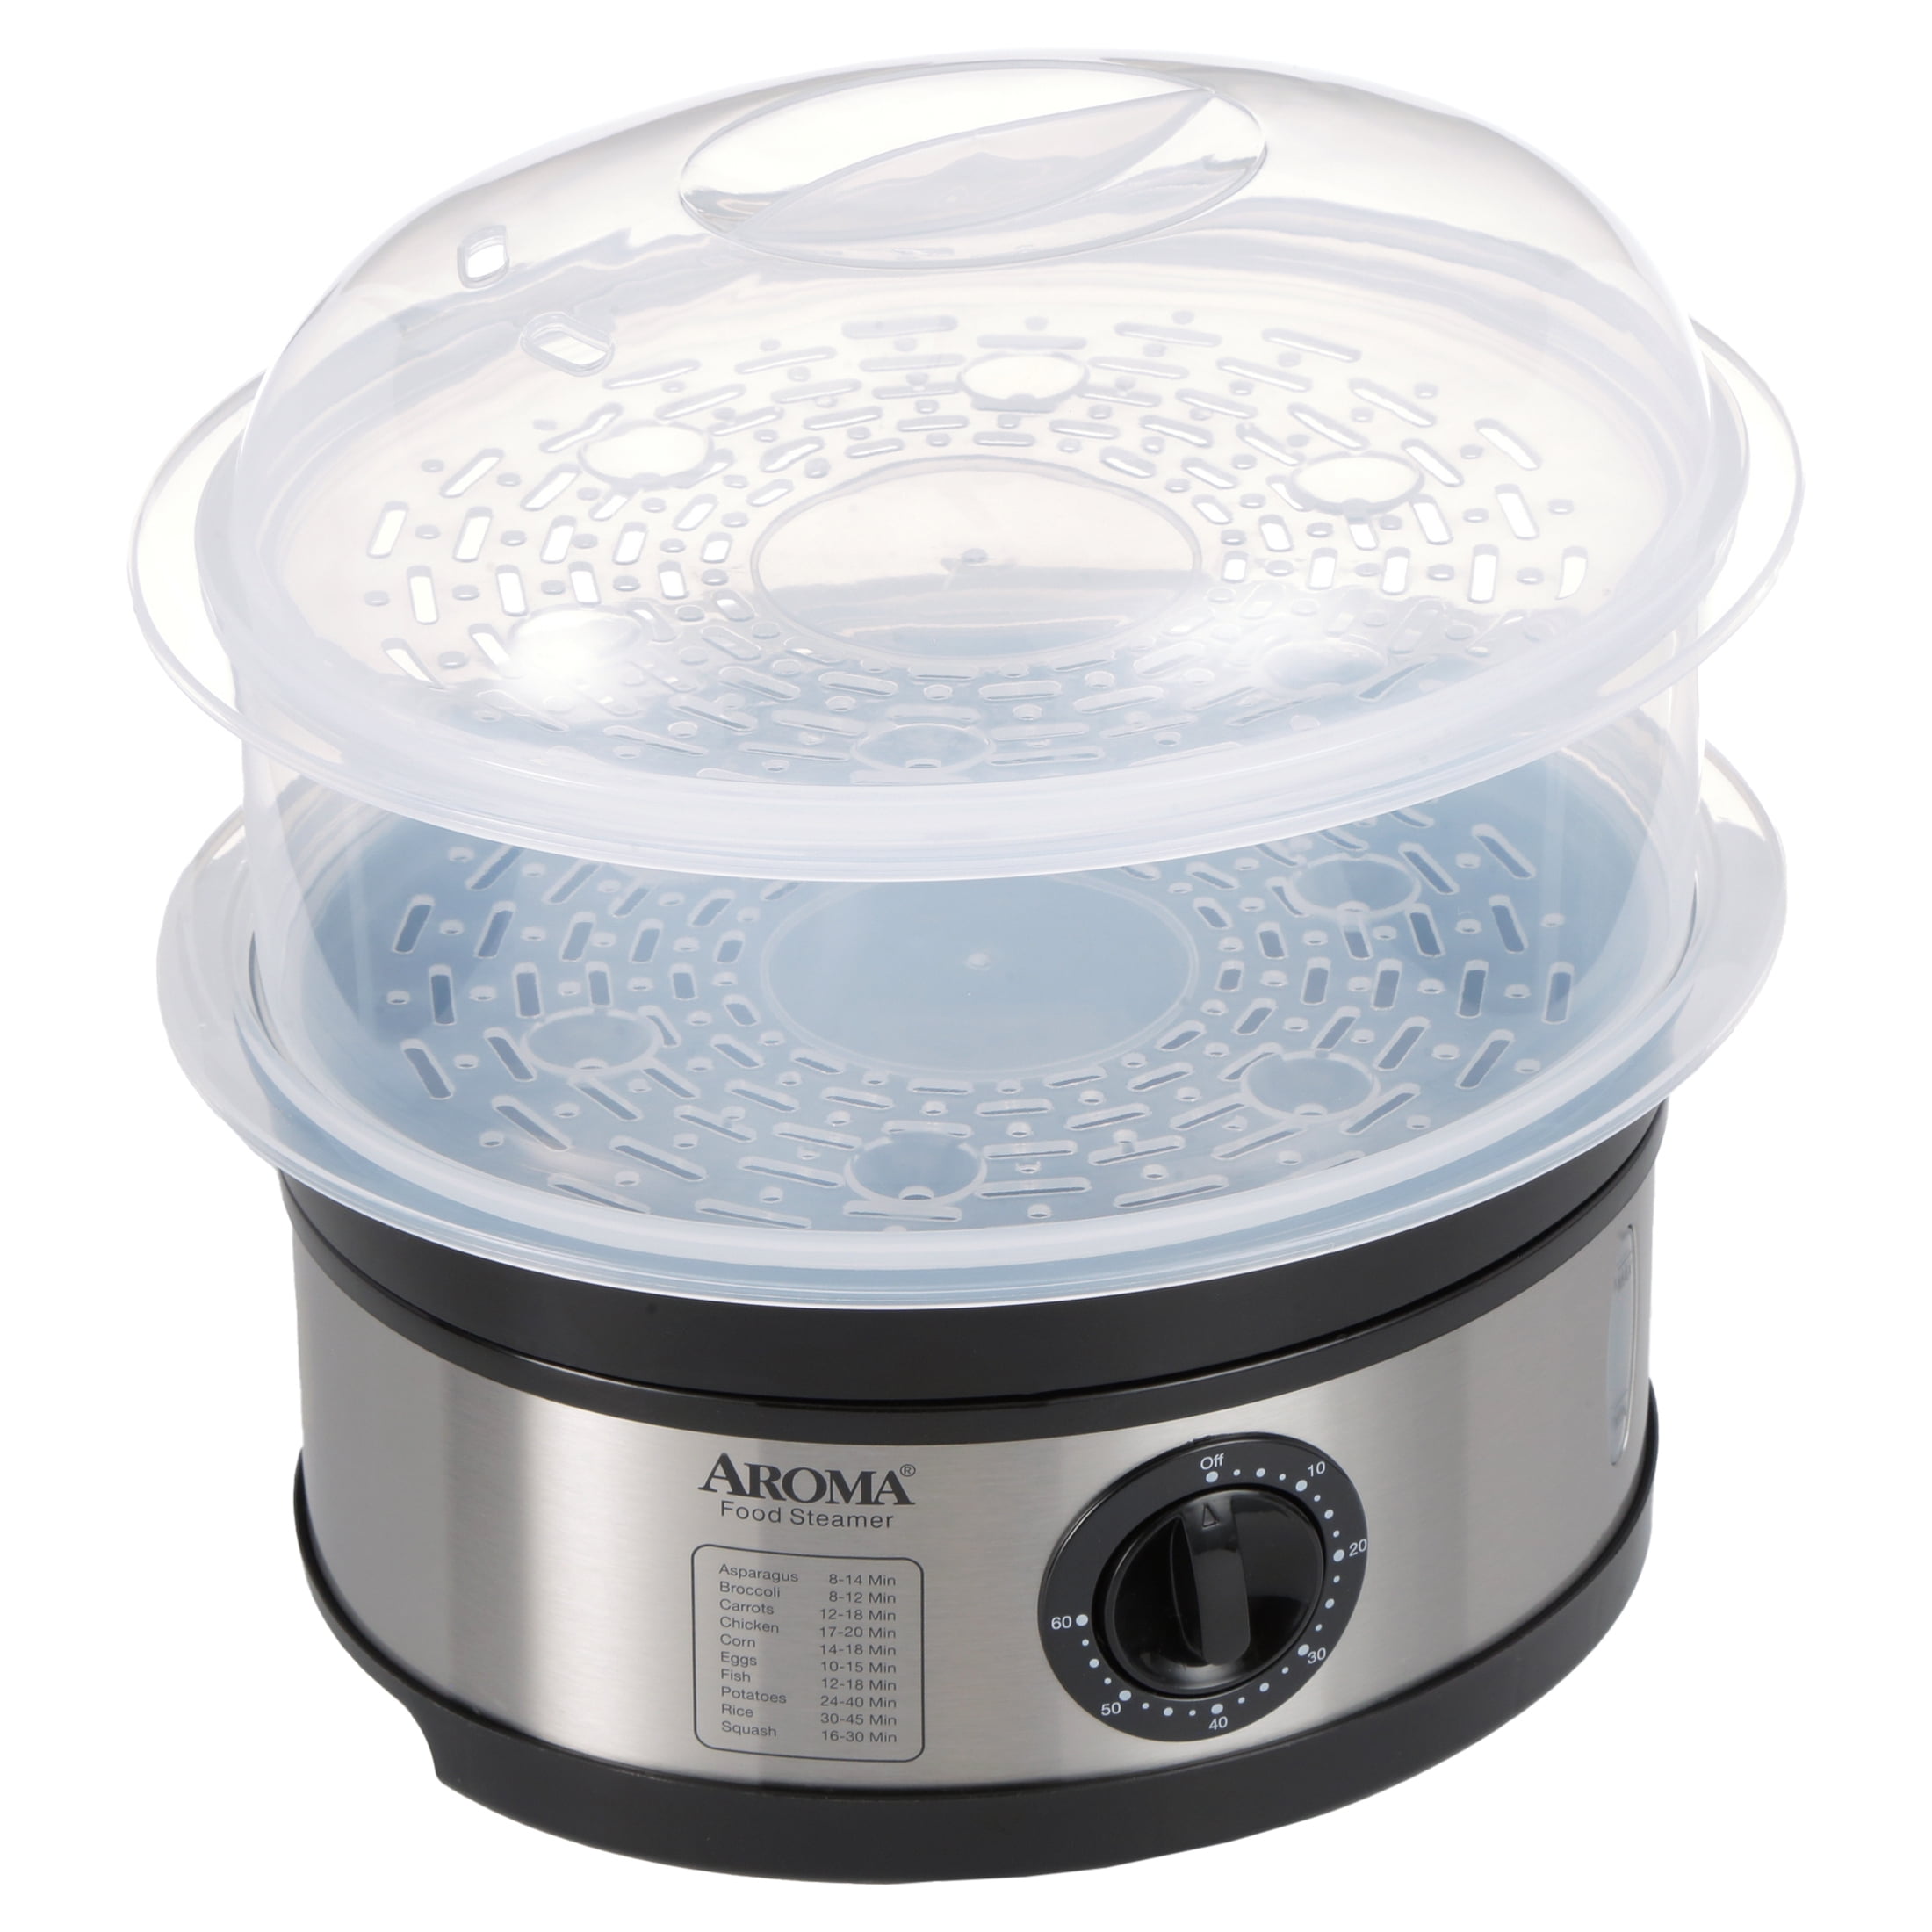 NEW..AROMA; PROFESSIONAL MULTI-COOKER, FOOD STEAMER..16 CUPS - general for  sale - by owner - craigslist